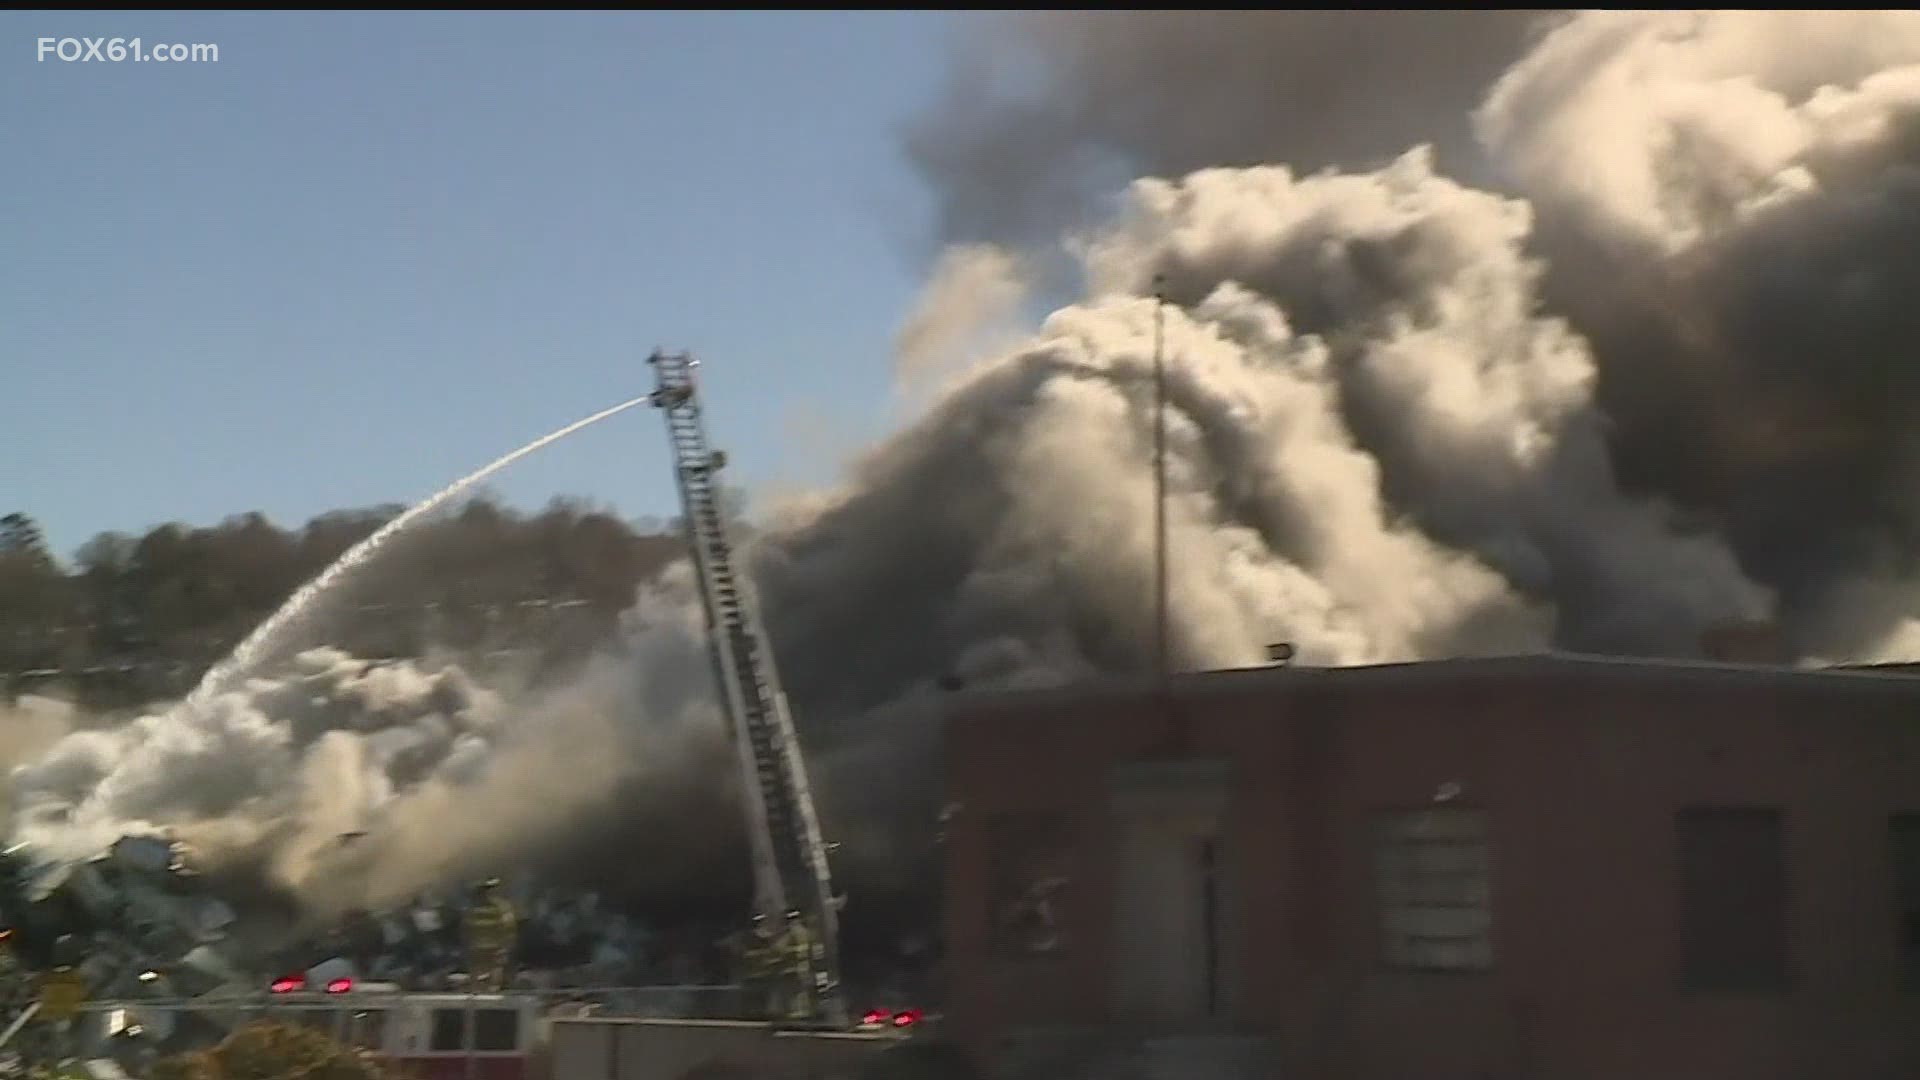 The fire was at Albert Brothers Scrapyard on East Aurora Street.